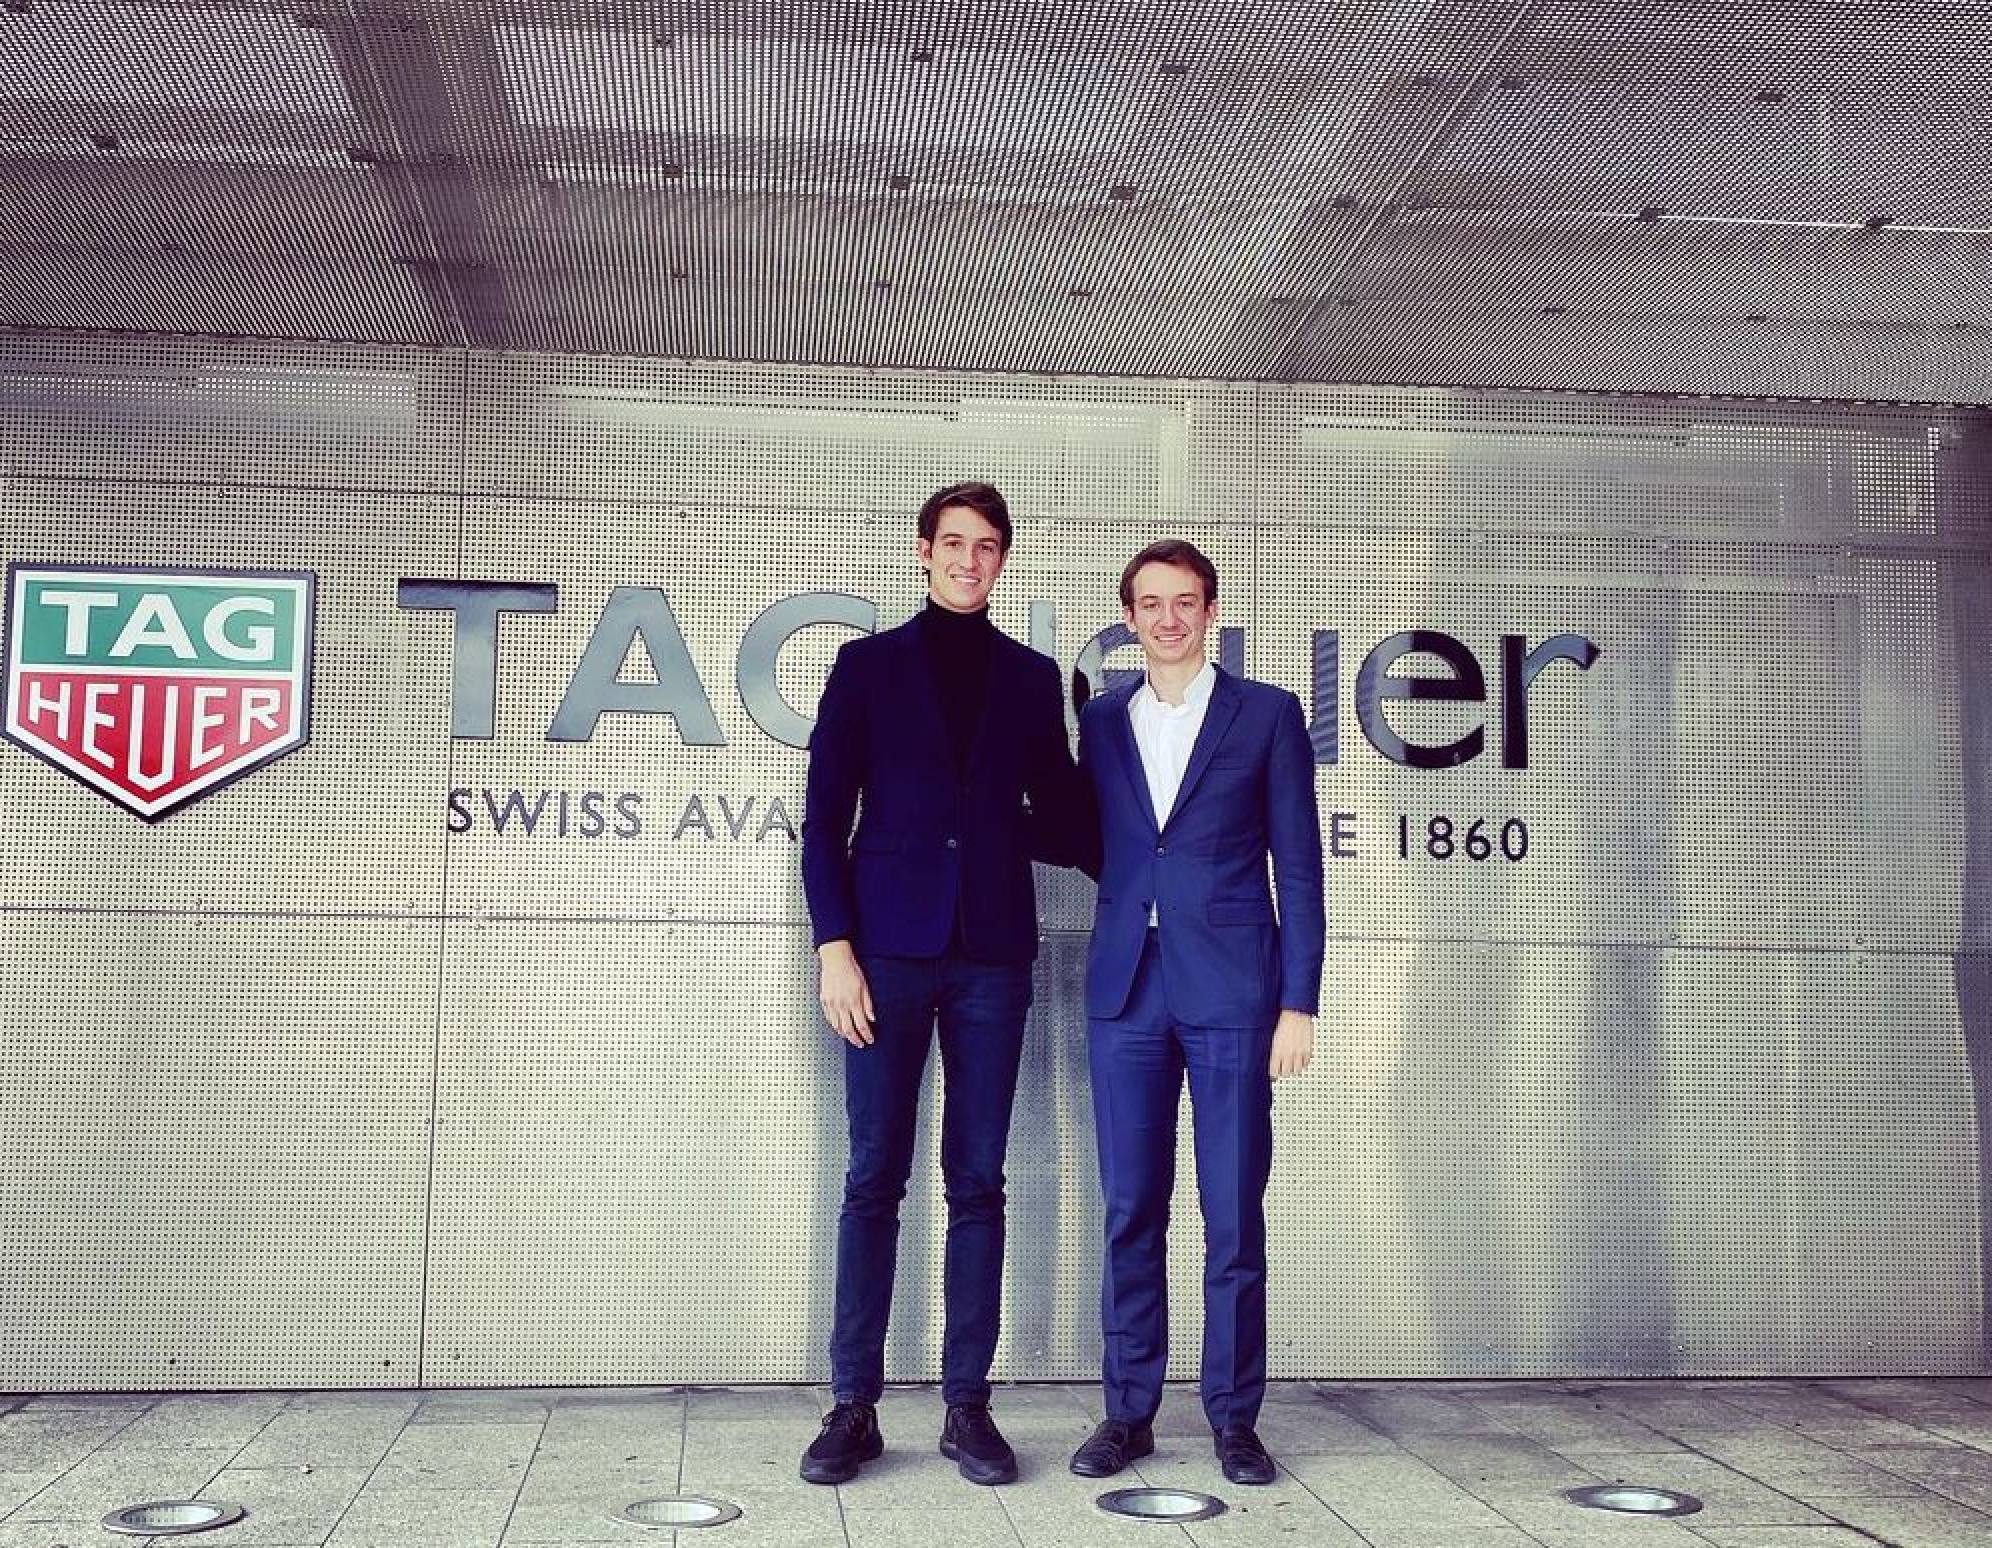 Meet Frédéric Arnault, the Tag Heuer CEO vying to run LVMH: Bernard  Arnault's third son bagged Ryan Gosling as brand ambassador, plays tennis  with Roger Federer and launched an NFT-friendly watch